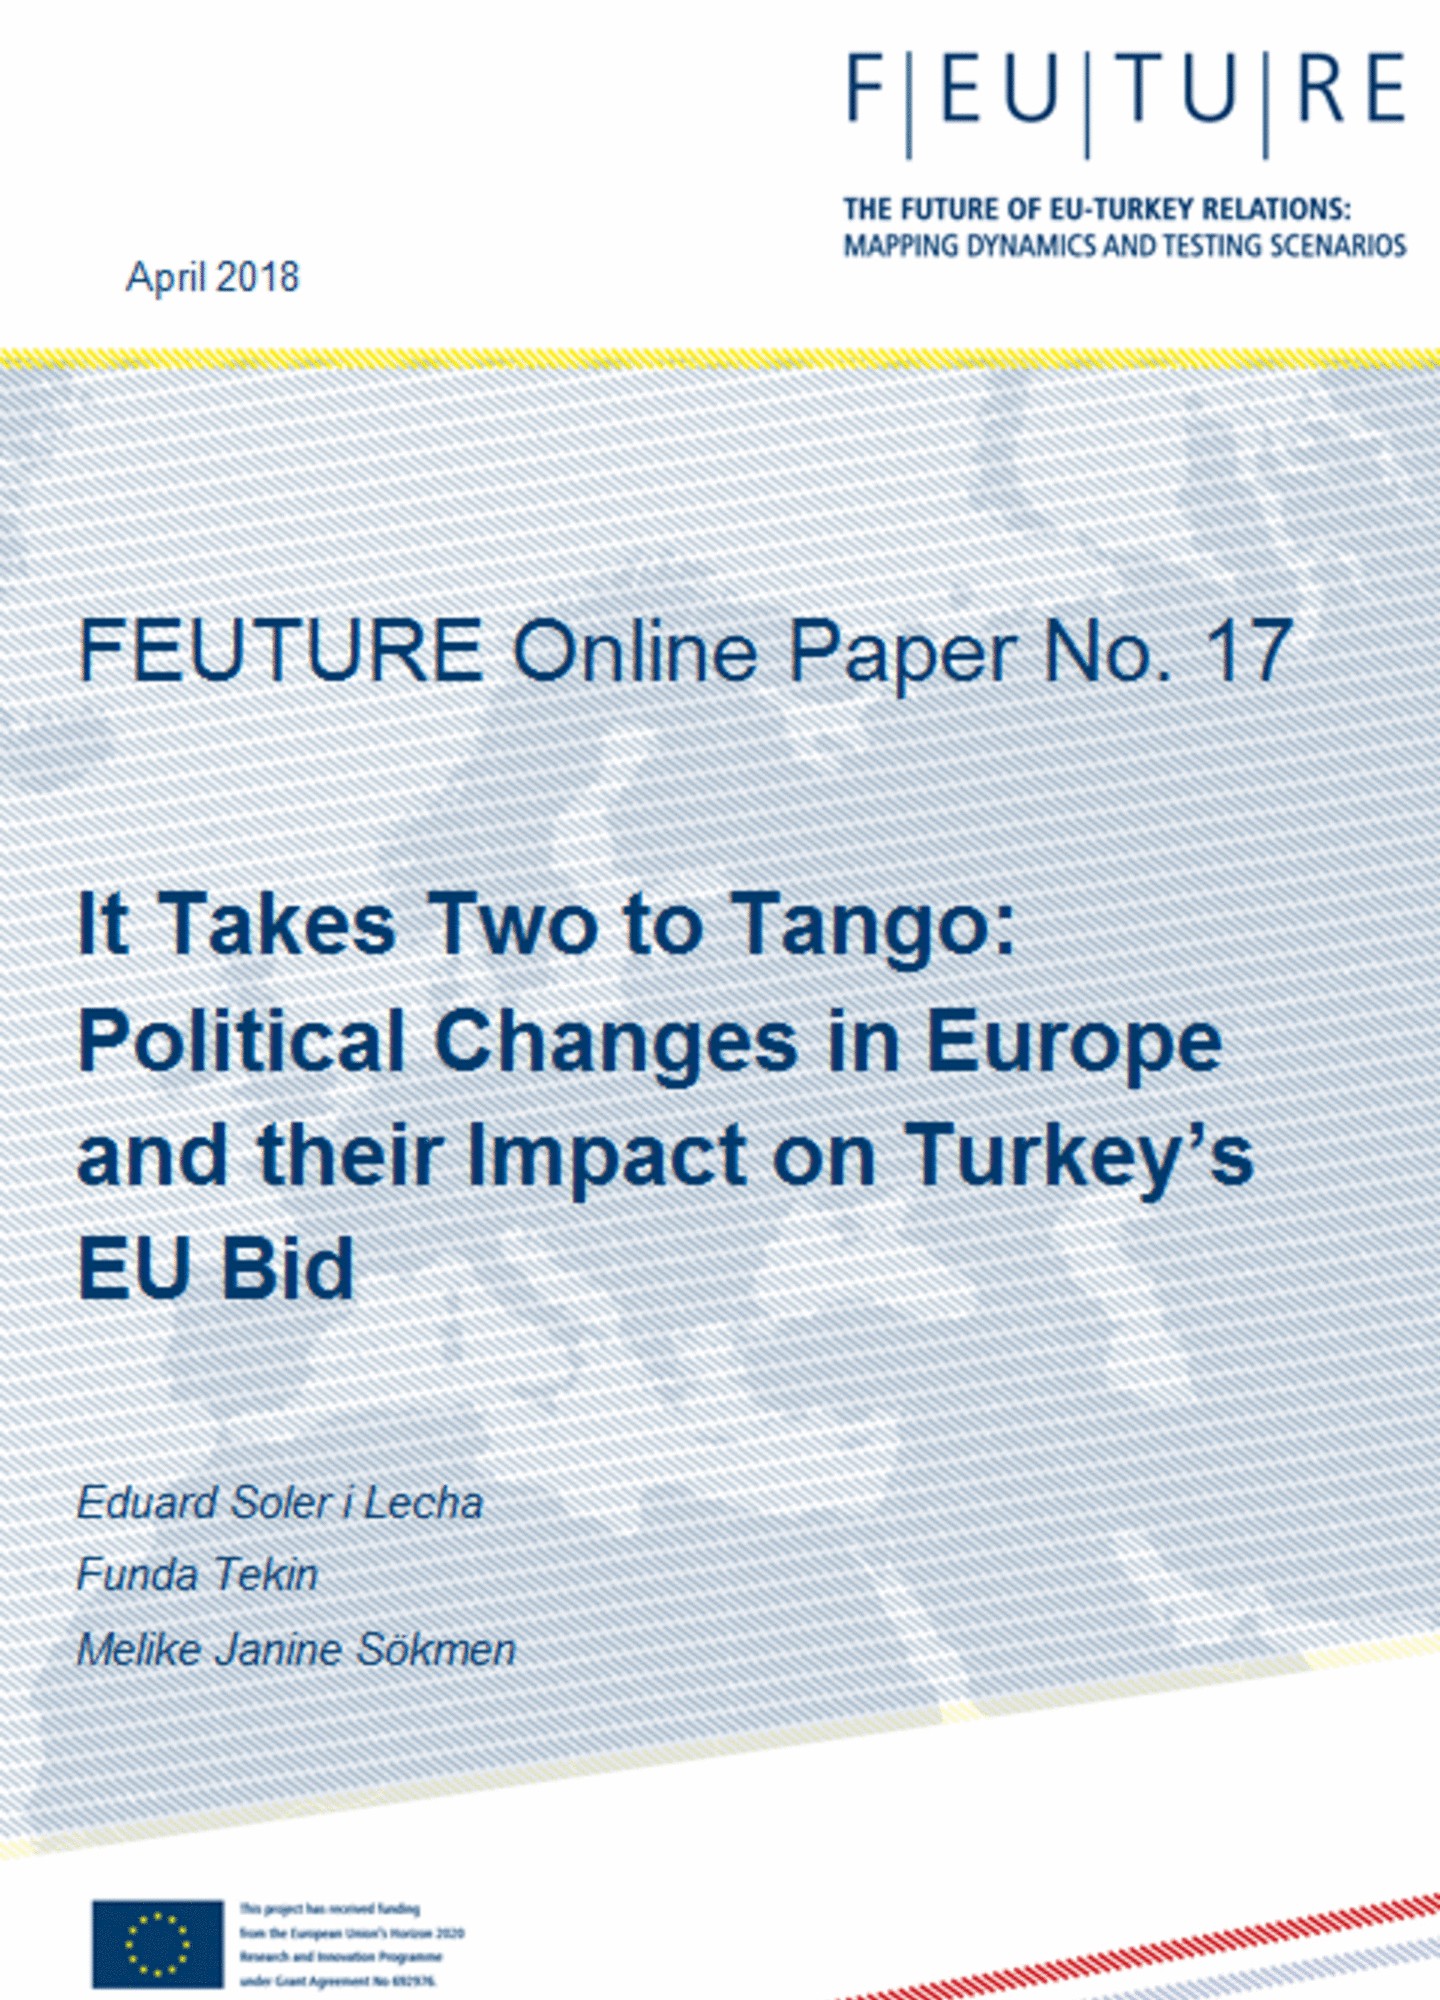 It Takes Two to Tango: Political changes in Europe and their Impact on Turkey's EU bid